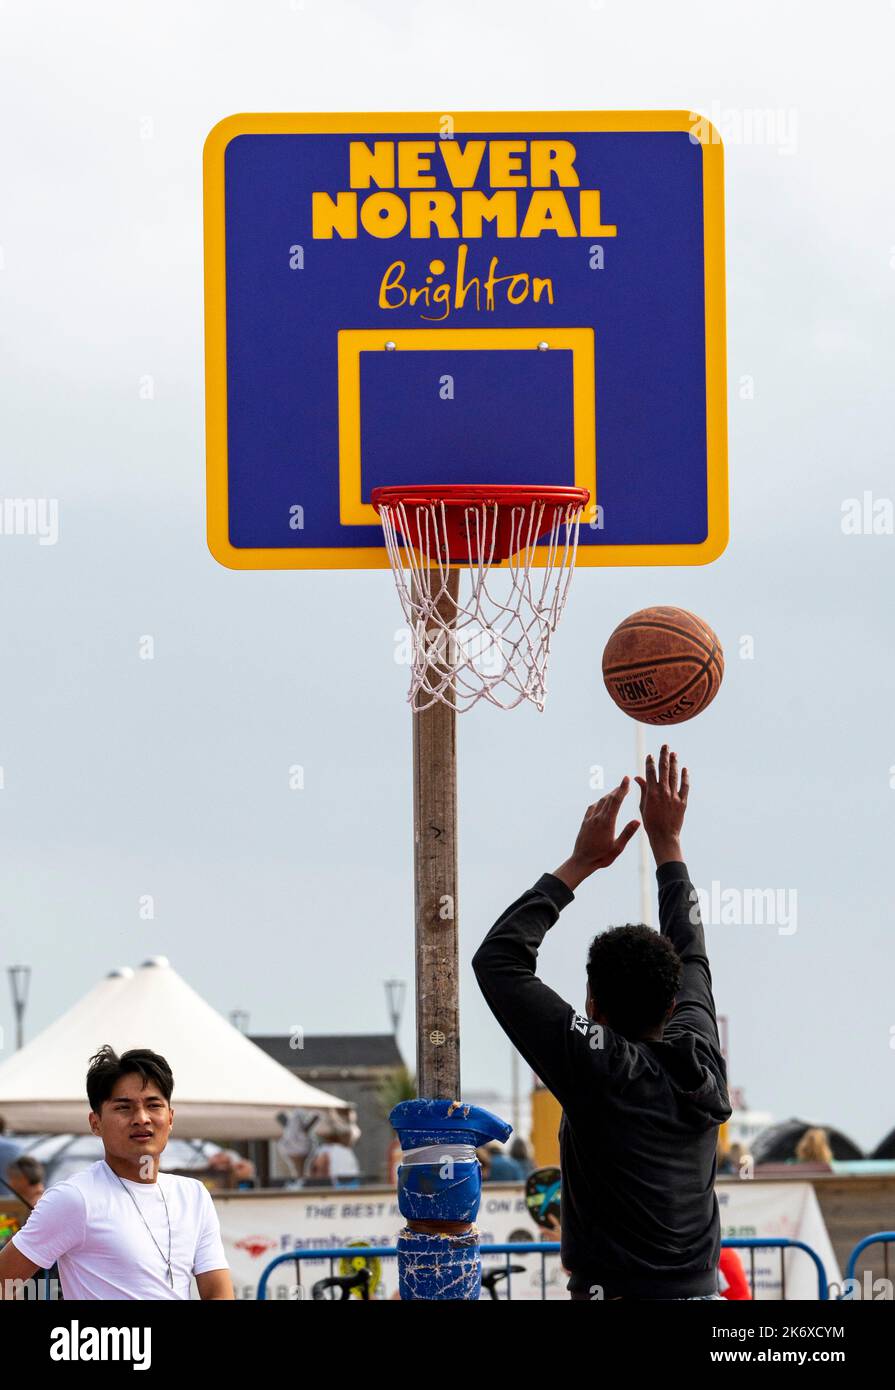 Brighton UK 16th October 2022 - Never Normal as basketball players enjoy a warm day on Brighton  seafront as more unsettled weather is forecast for the next few days in the UK : Credit Simon Dack / Alamy Live News Stock Photo